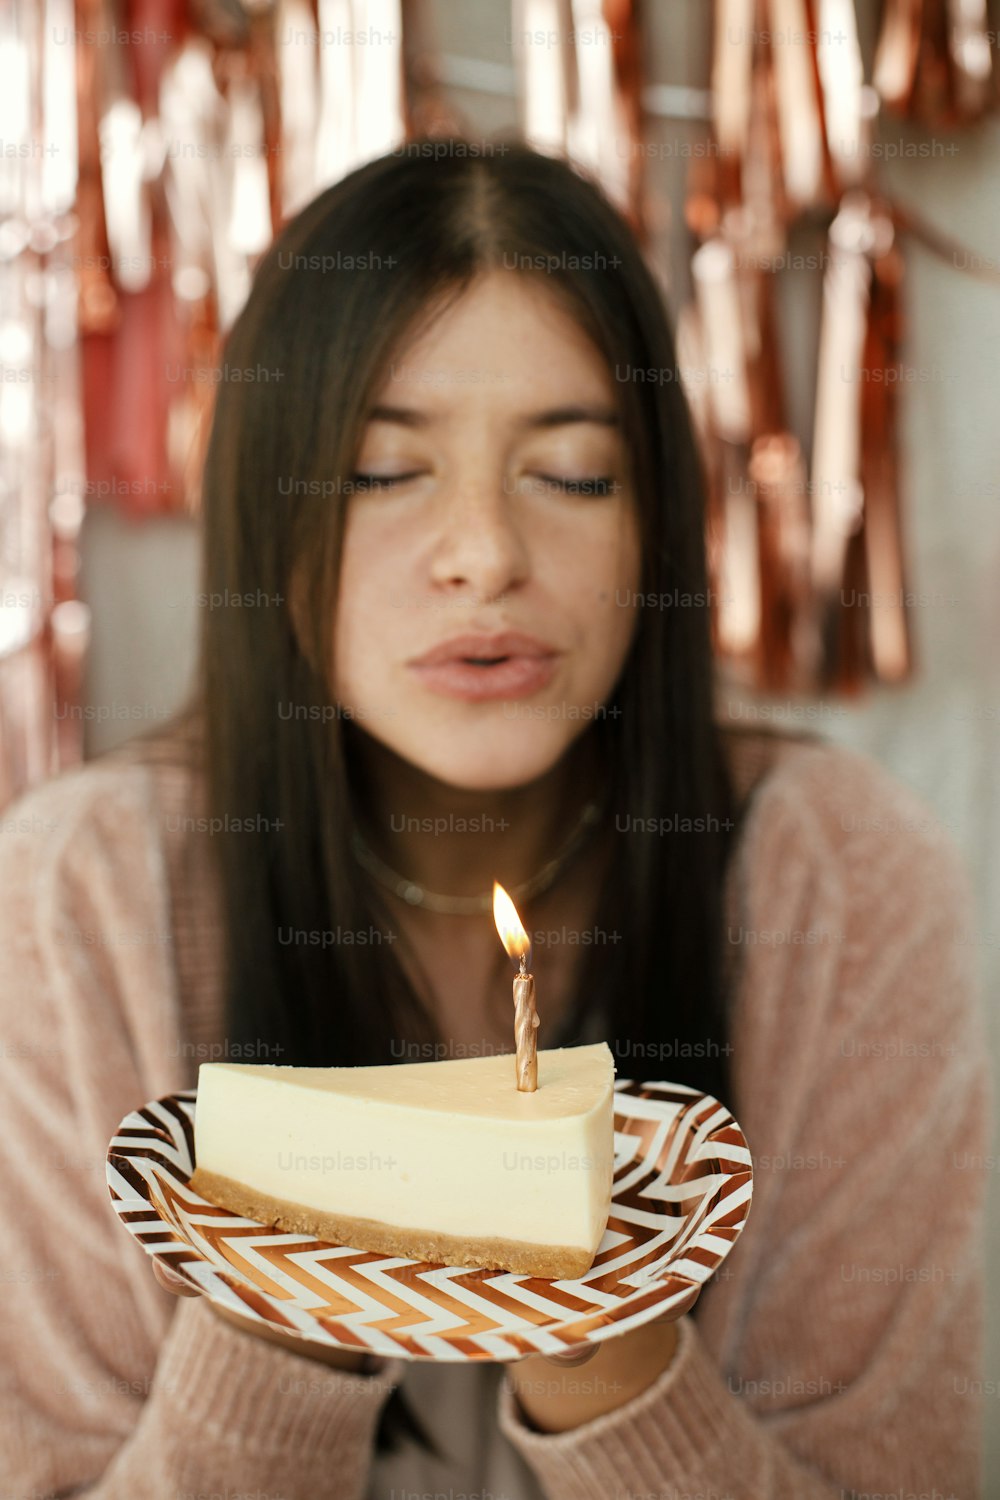 Piece of modern birthday cake with burning candle in hand on background of happy woman and modern rose gold tassel garland in room. Celebrating birthday at home. Make a wish